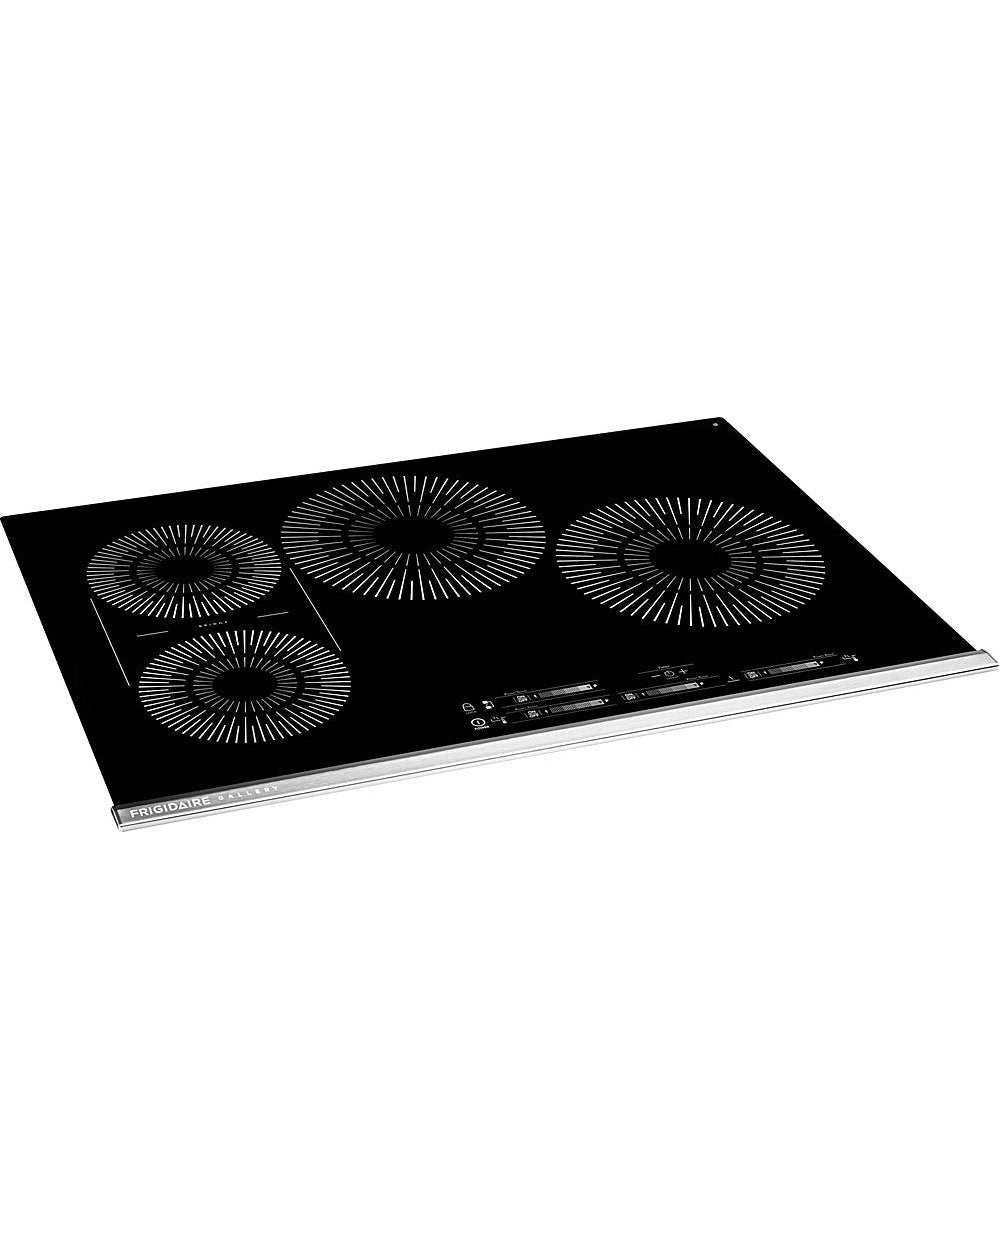 FRIGIDAIRE GCCI3067AB Gallery 30&quot; Induction Cooktop